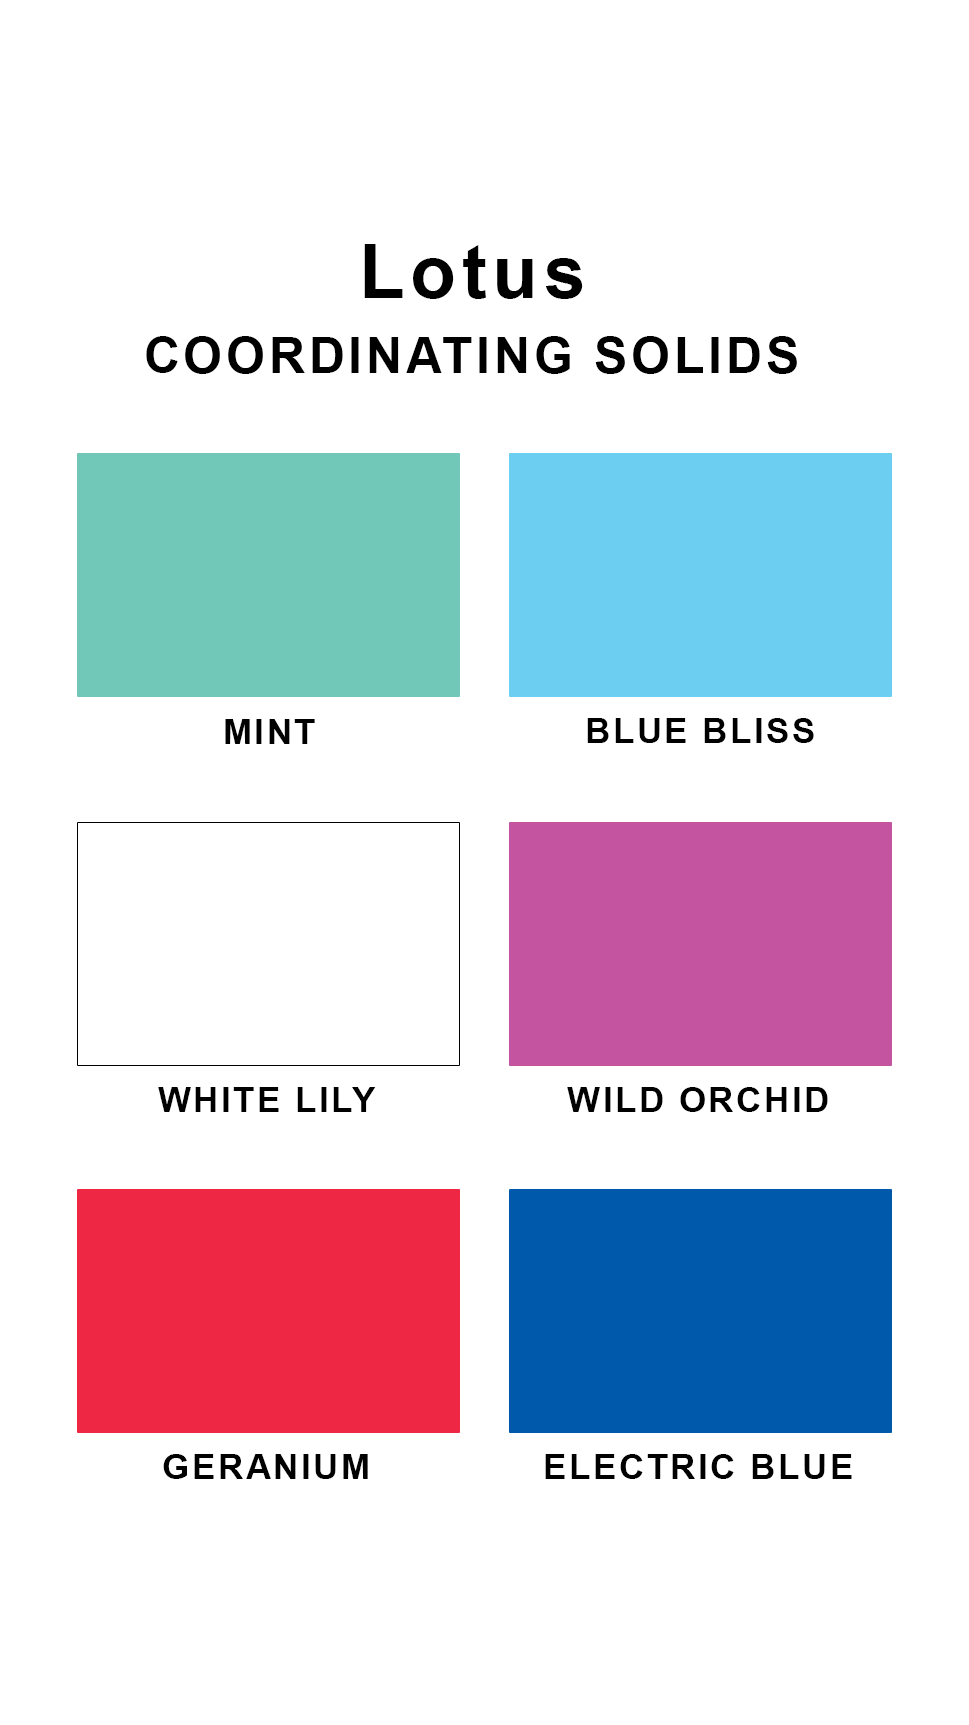 Coordinating solids chart for Lotus swimsuit print: Mint, Blue Bliss, White Lily, Wild Orchid, Geranium and Electric Blue 